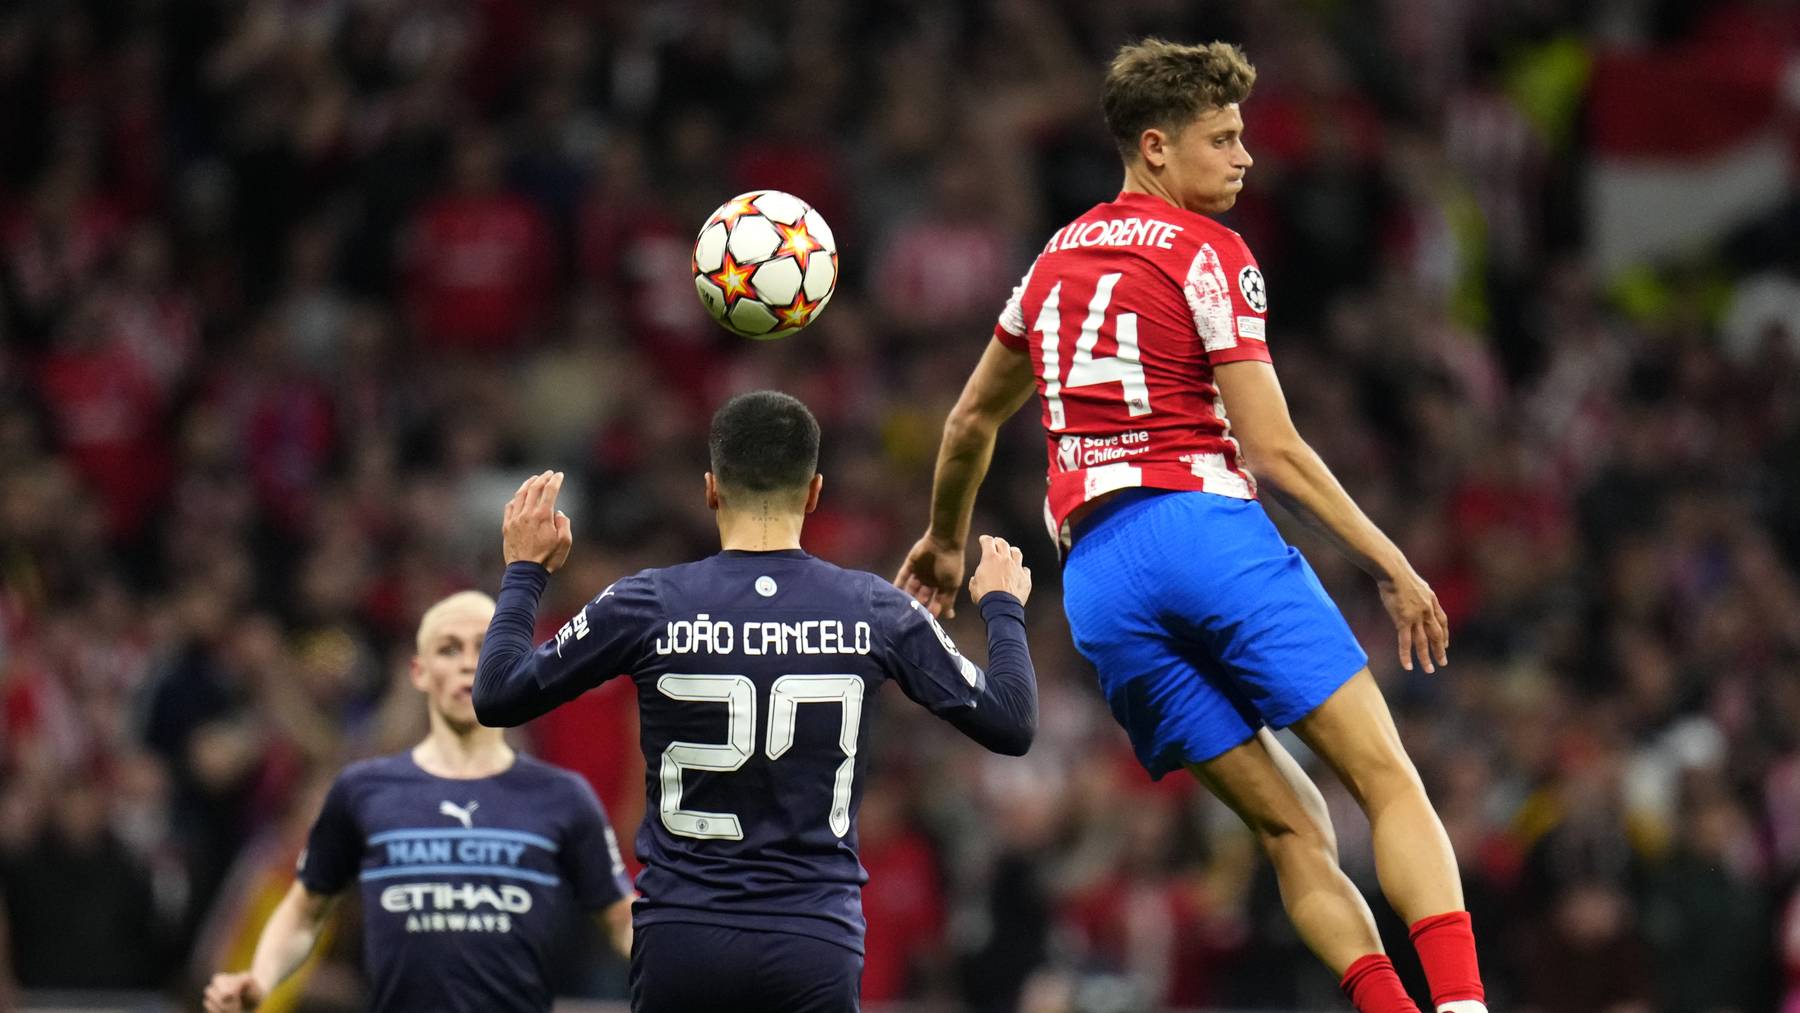 Atletico Madrid's Marcos Llorente, right, leaps up for a ball by Manchester City's Joao Cancelo, center, during the Champions League quarterfinal second leg soccer match between Atletico Madrid and Manchester City at Wanda Metropolitano stadium in Madrid, Spain, Wednesday, April 13, 2022.